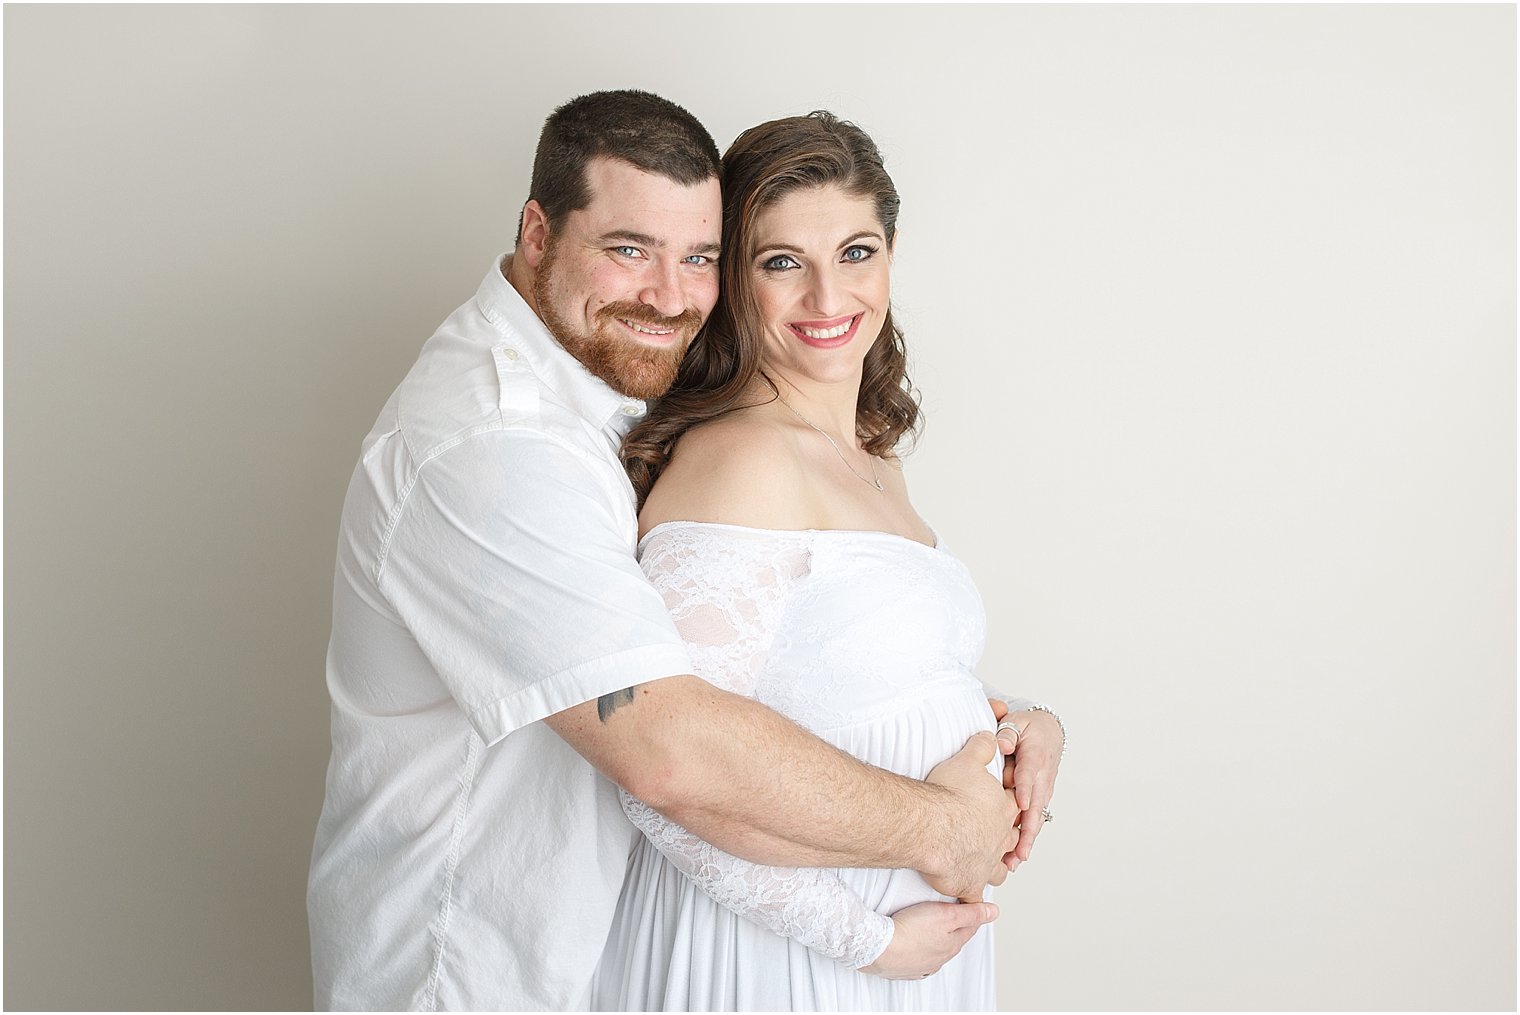 New parents with baby bump